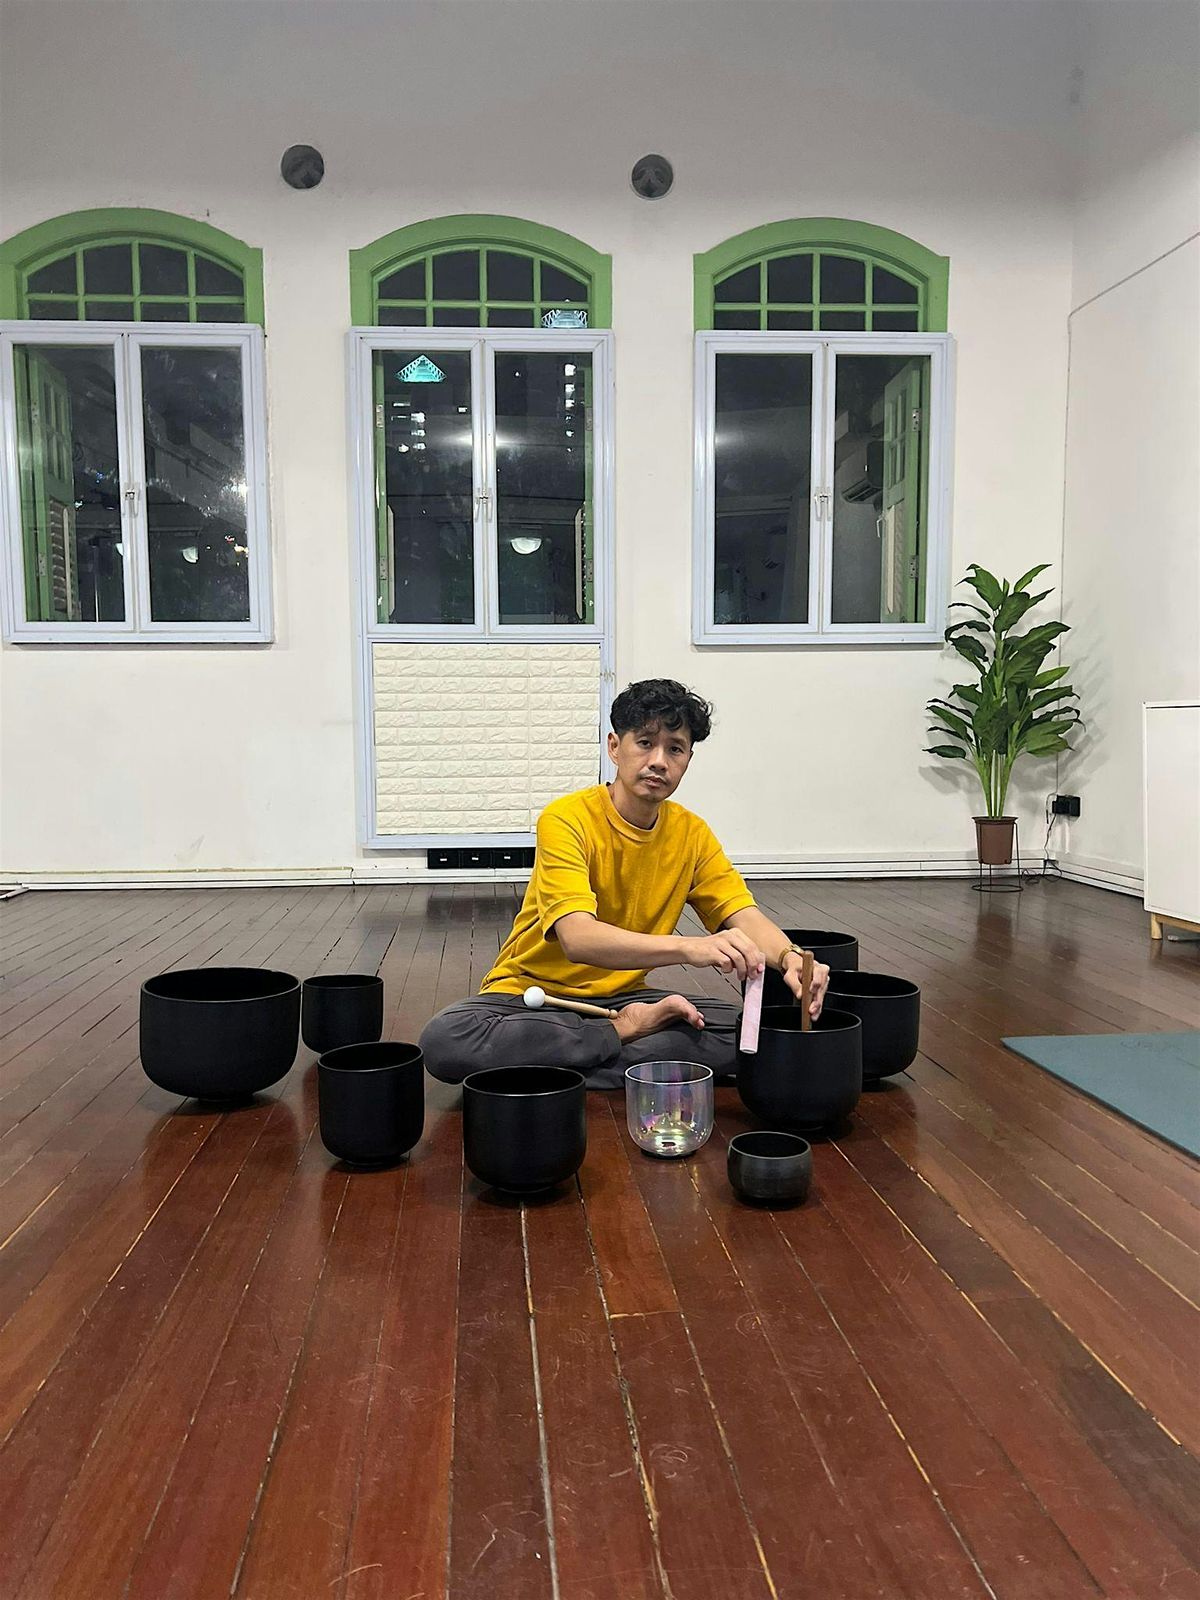 Sound Bath featuring Crystal and Metal Singing Bowls